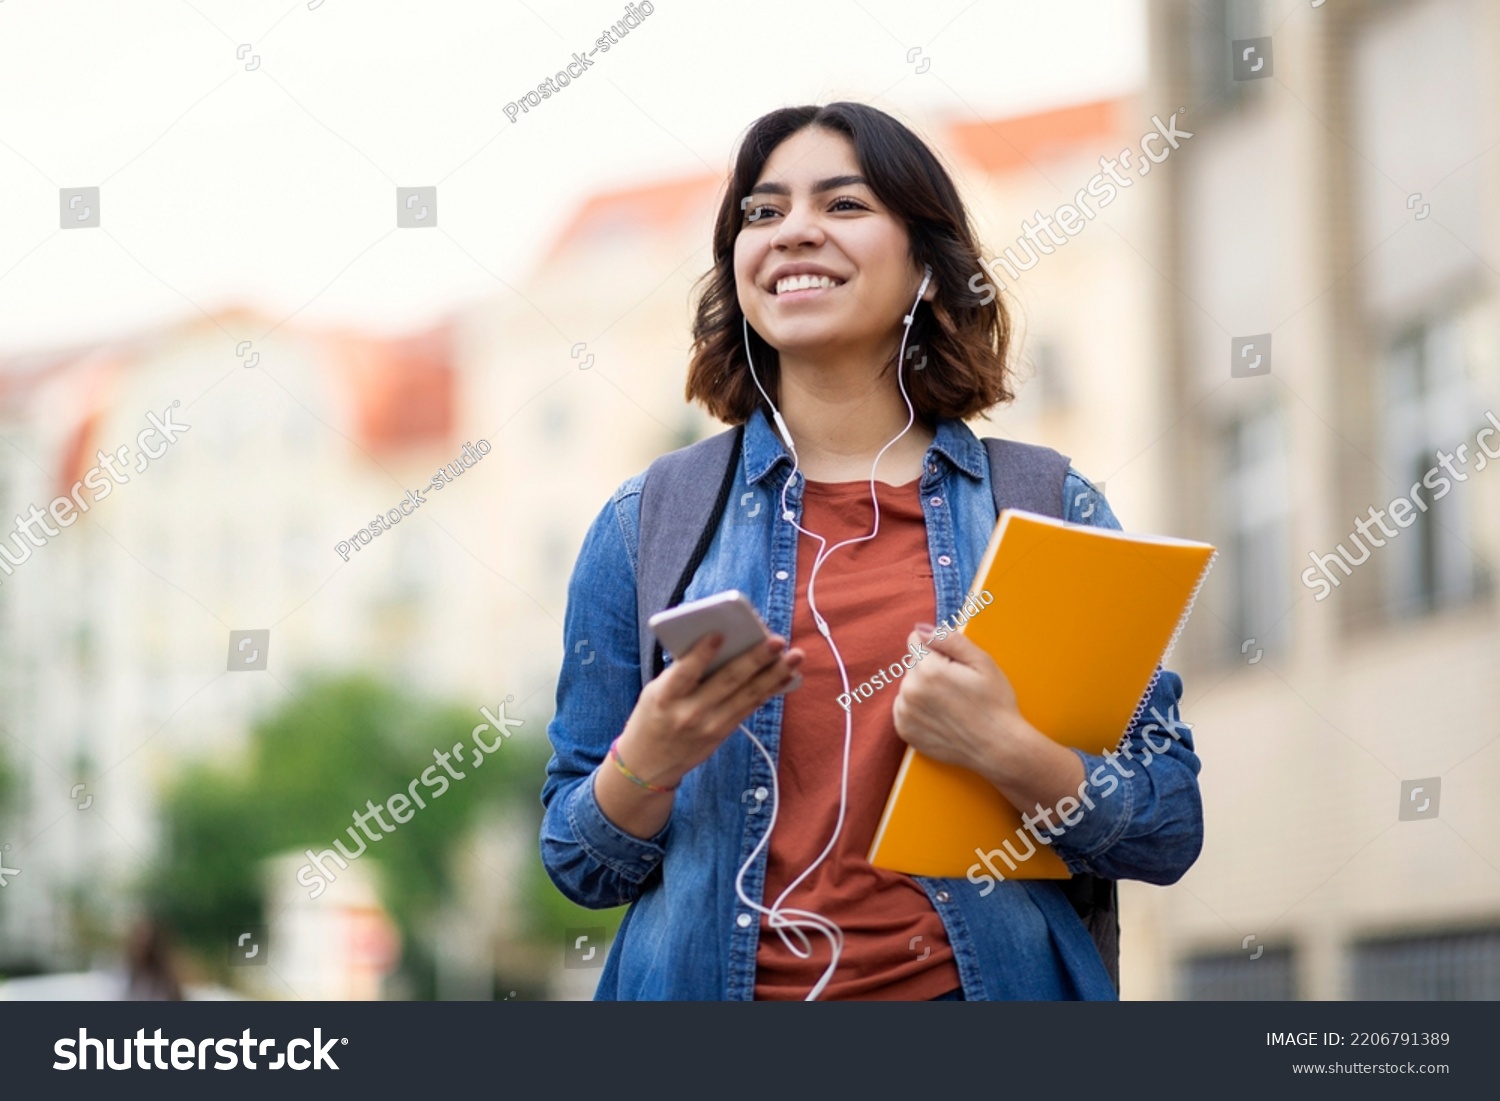 Cheerful young arab student female listening music with smartphone and earphones outdoors, smiling middle eastern woman carrying workbooks and backpack while walking on city street, copy space #2206791389